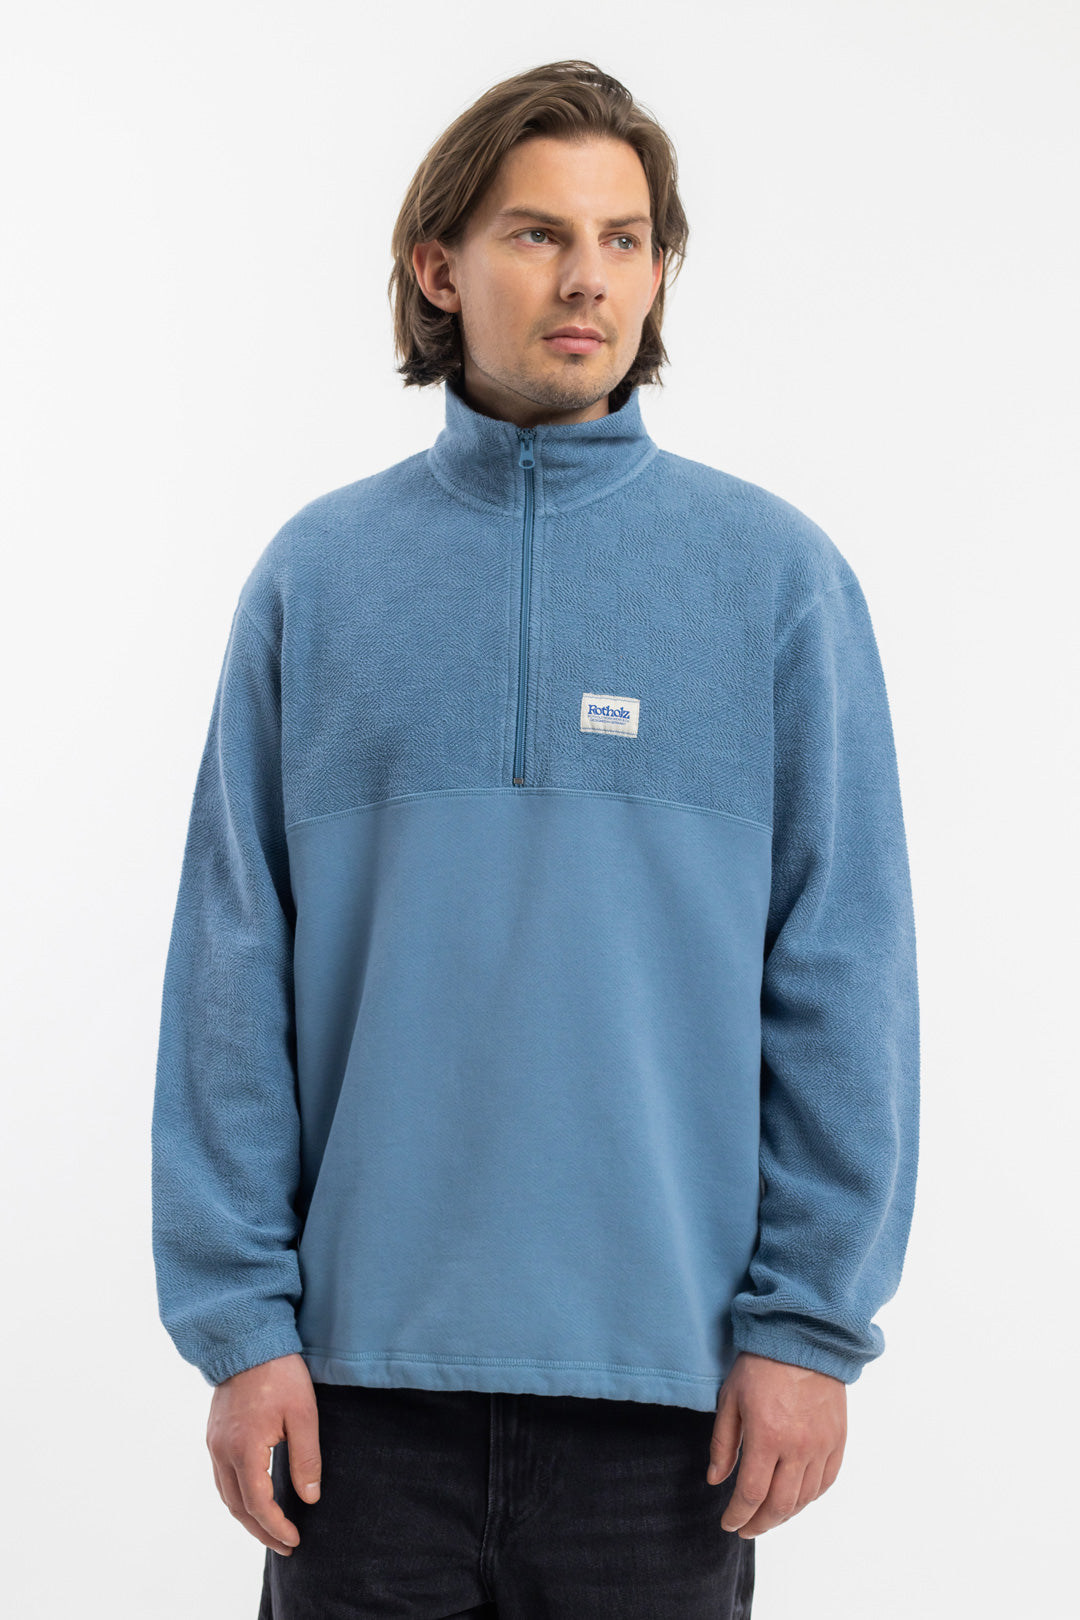 Light blue sweatshirt Divided made of 100% organic cotton by Rotholz